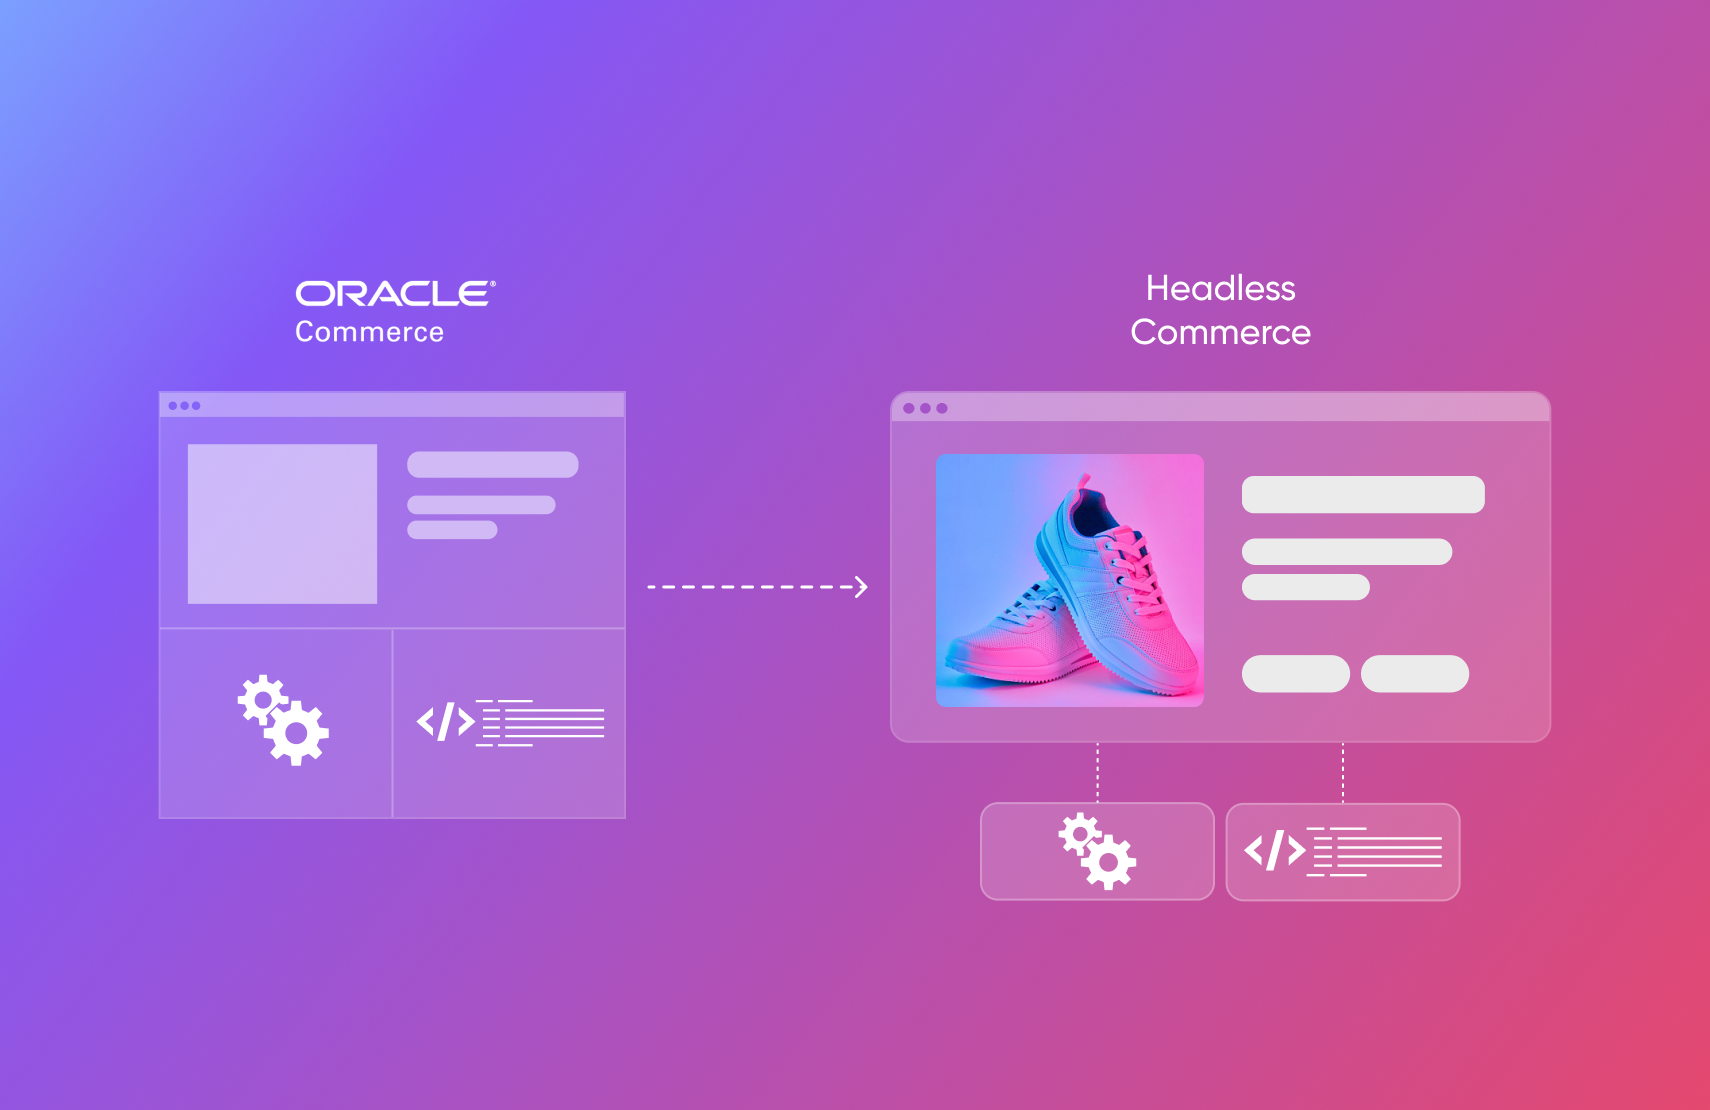 How Do You Migrate From the Oracle E-Commerce Platform to Headless Commerce?